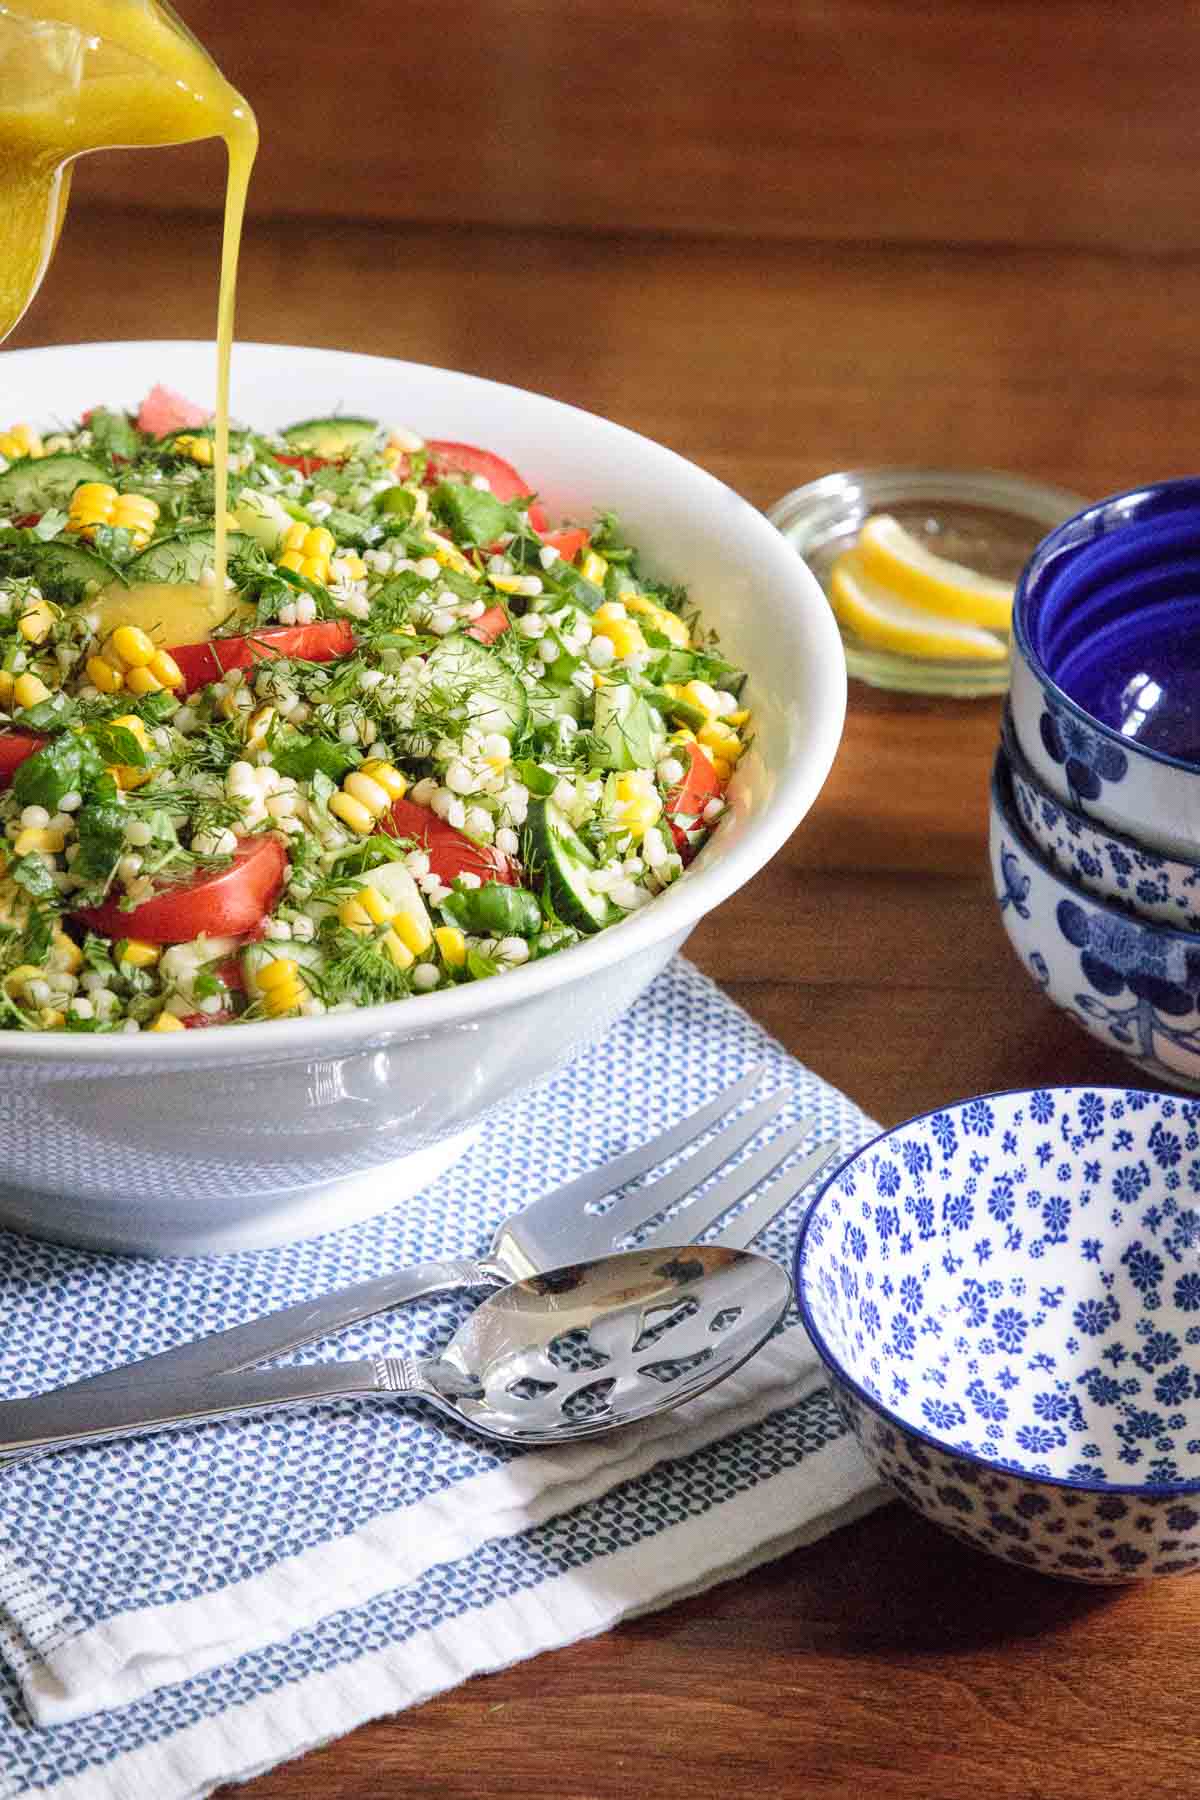 photo of a white serving bowl of Lemony Mediterranean Couscous Salad surrounded by serving bowls and utensils. Dressing is being poured over the salad.